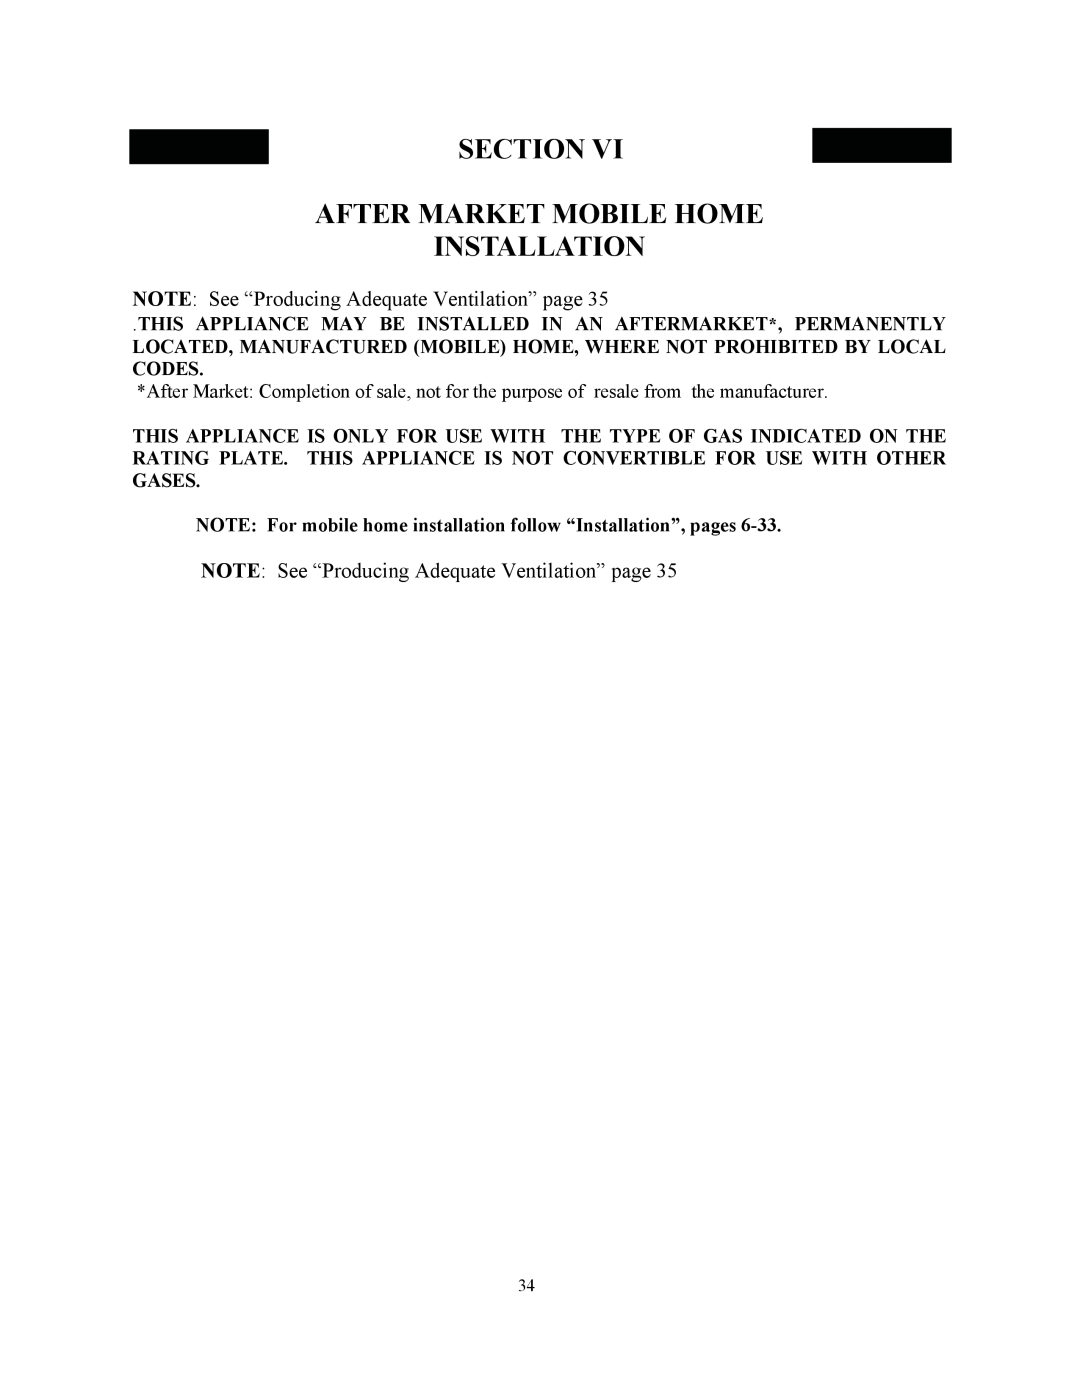 New Buck Corporation 34 manual Section After Market Mobile Home Installation 